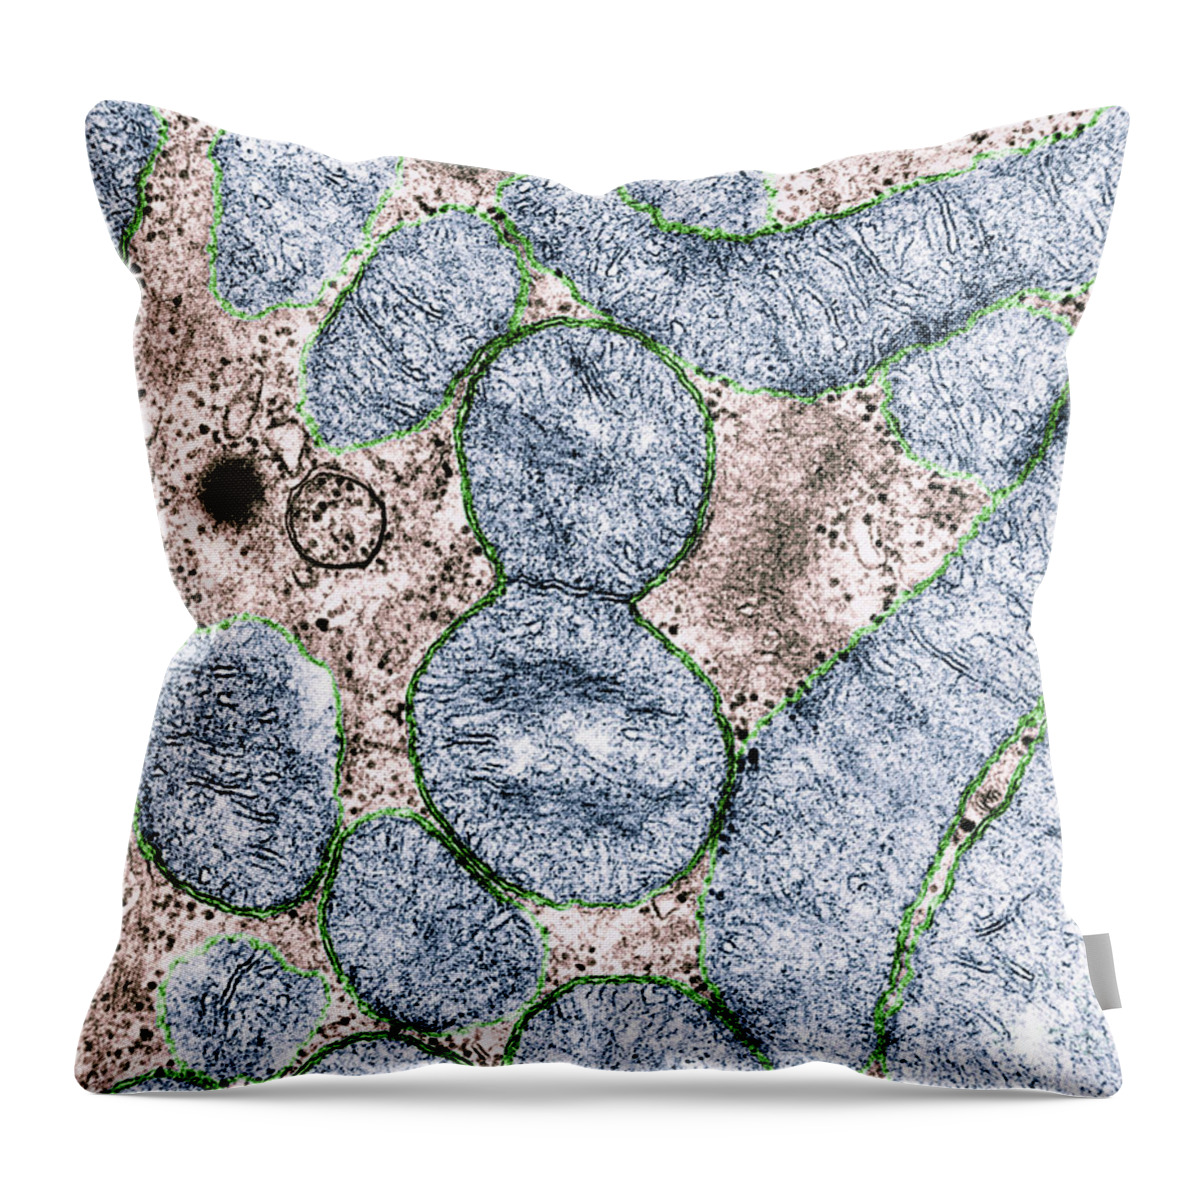 Mitochondrion Throw Pillow featuring the photograph Dividing Mitochondrion #5 by Omikron